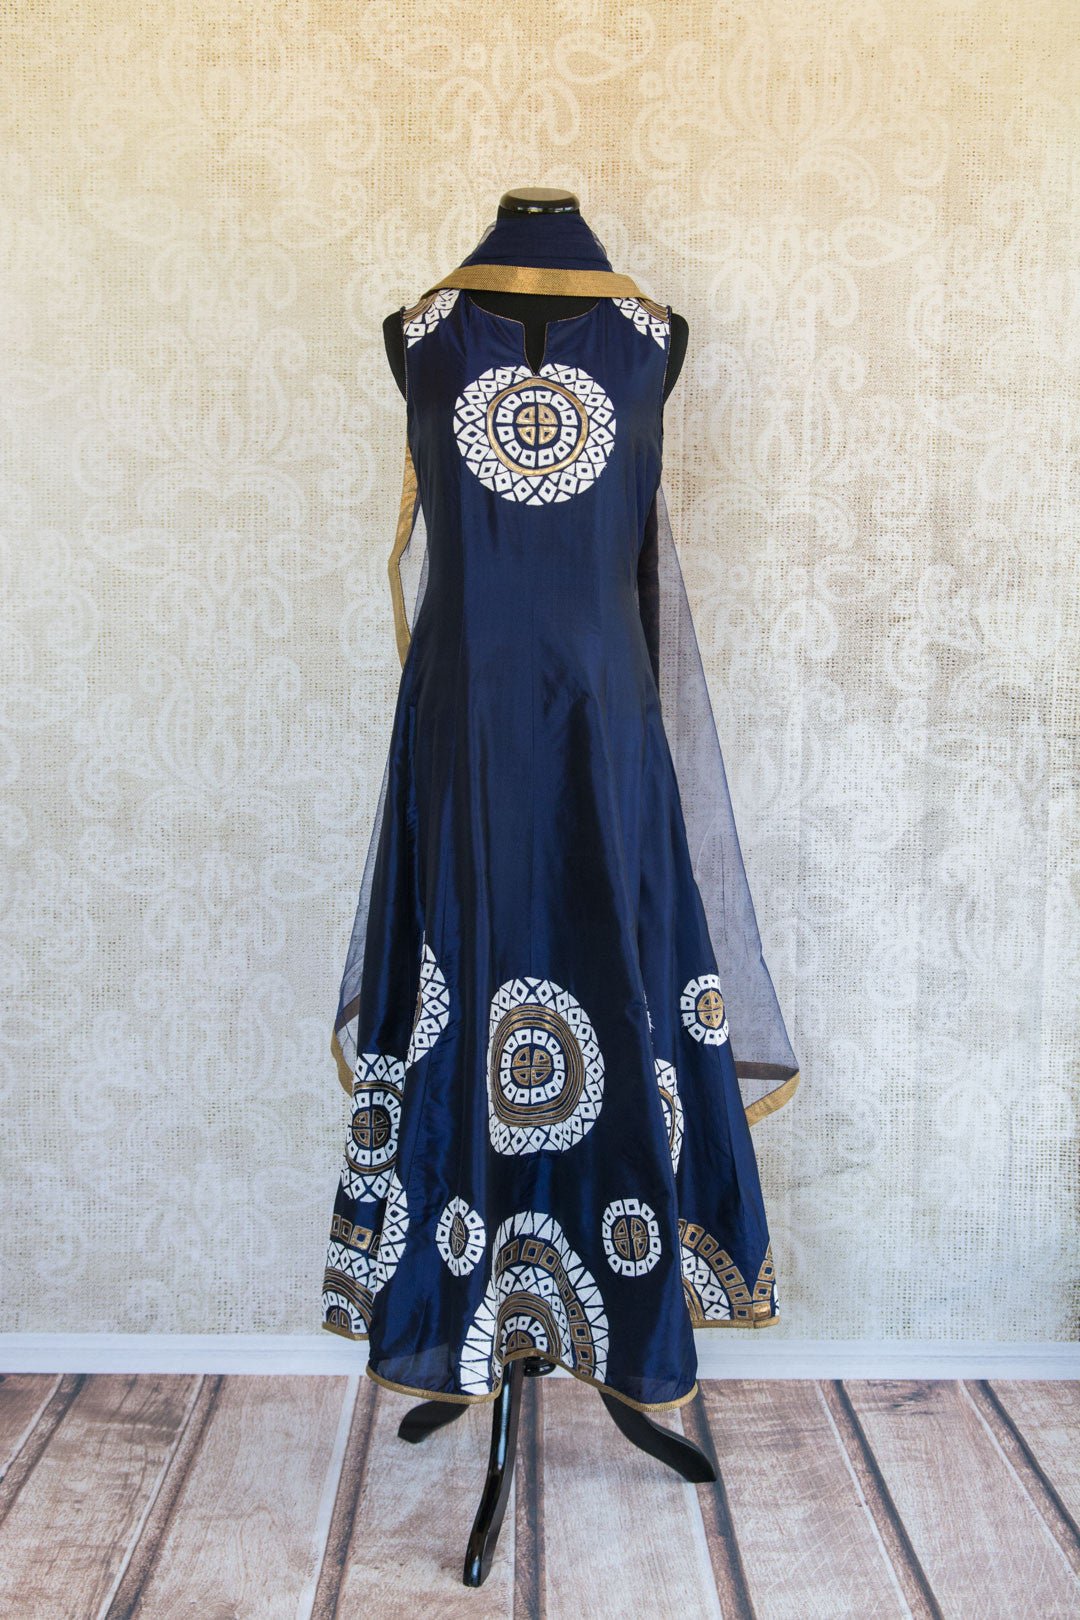 501087-suit-sleeveless-dark-blue-white-gold-circles-embroidered-scarf